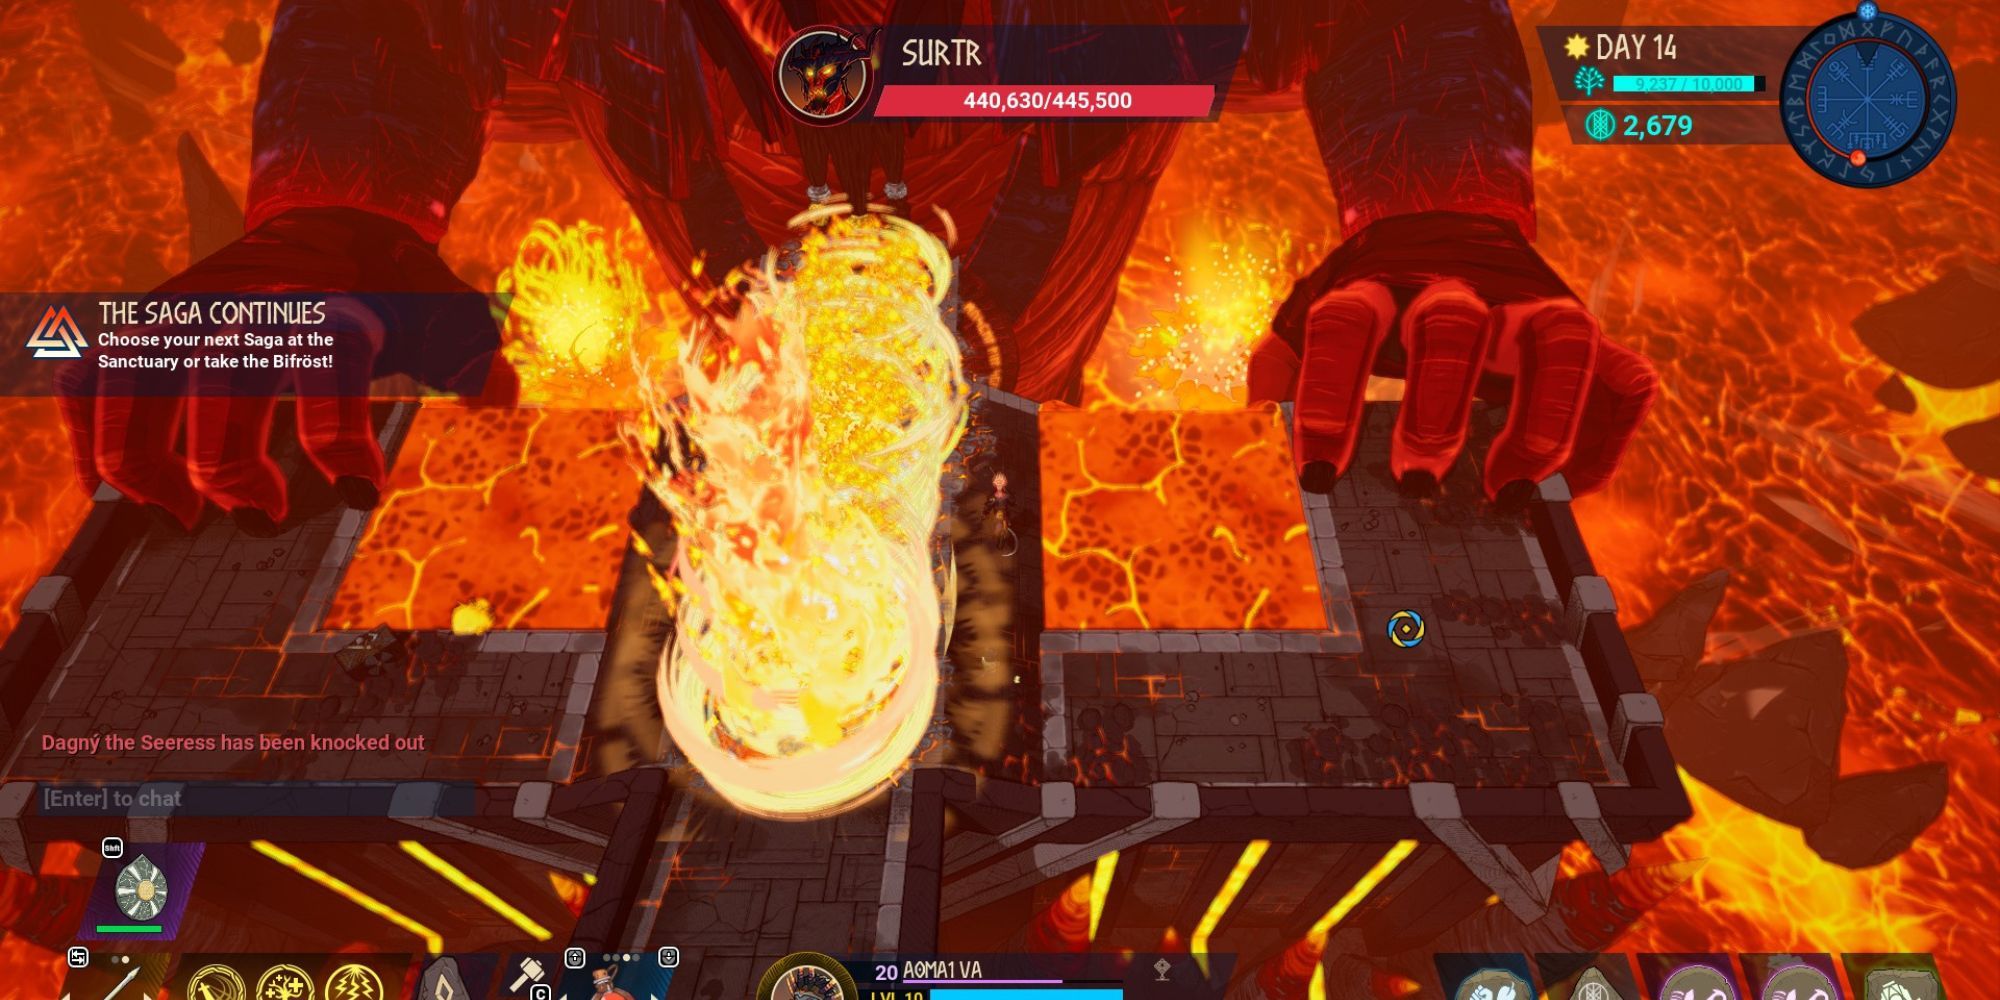 Pits fill with lava as Surtr summons fire circles in the center of the arena